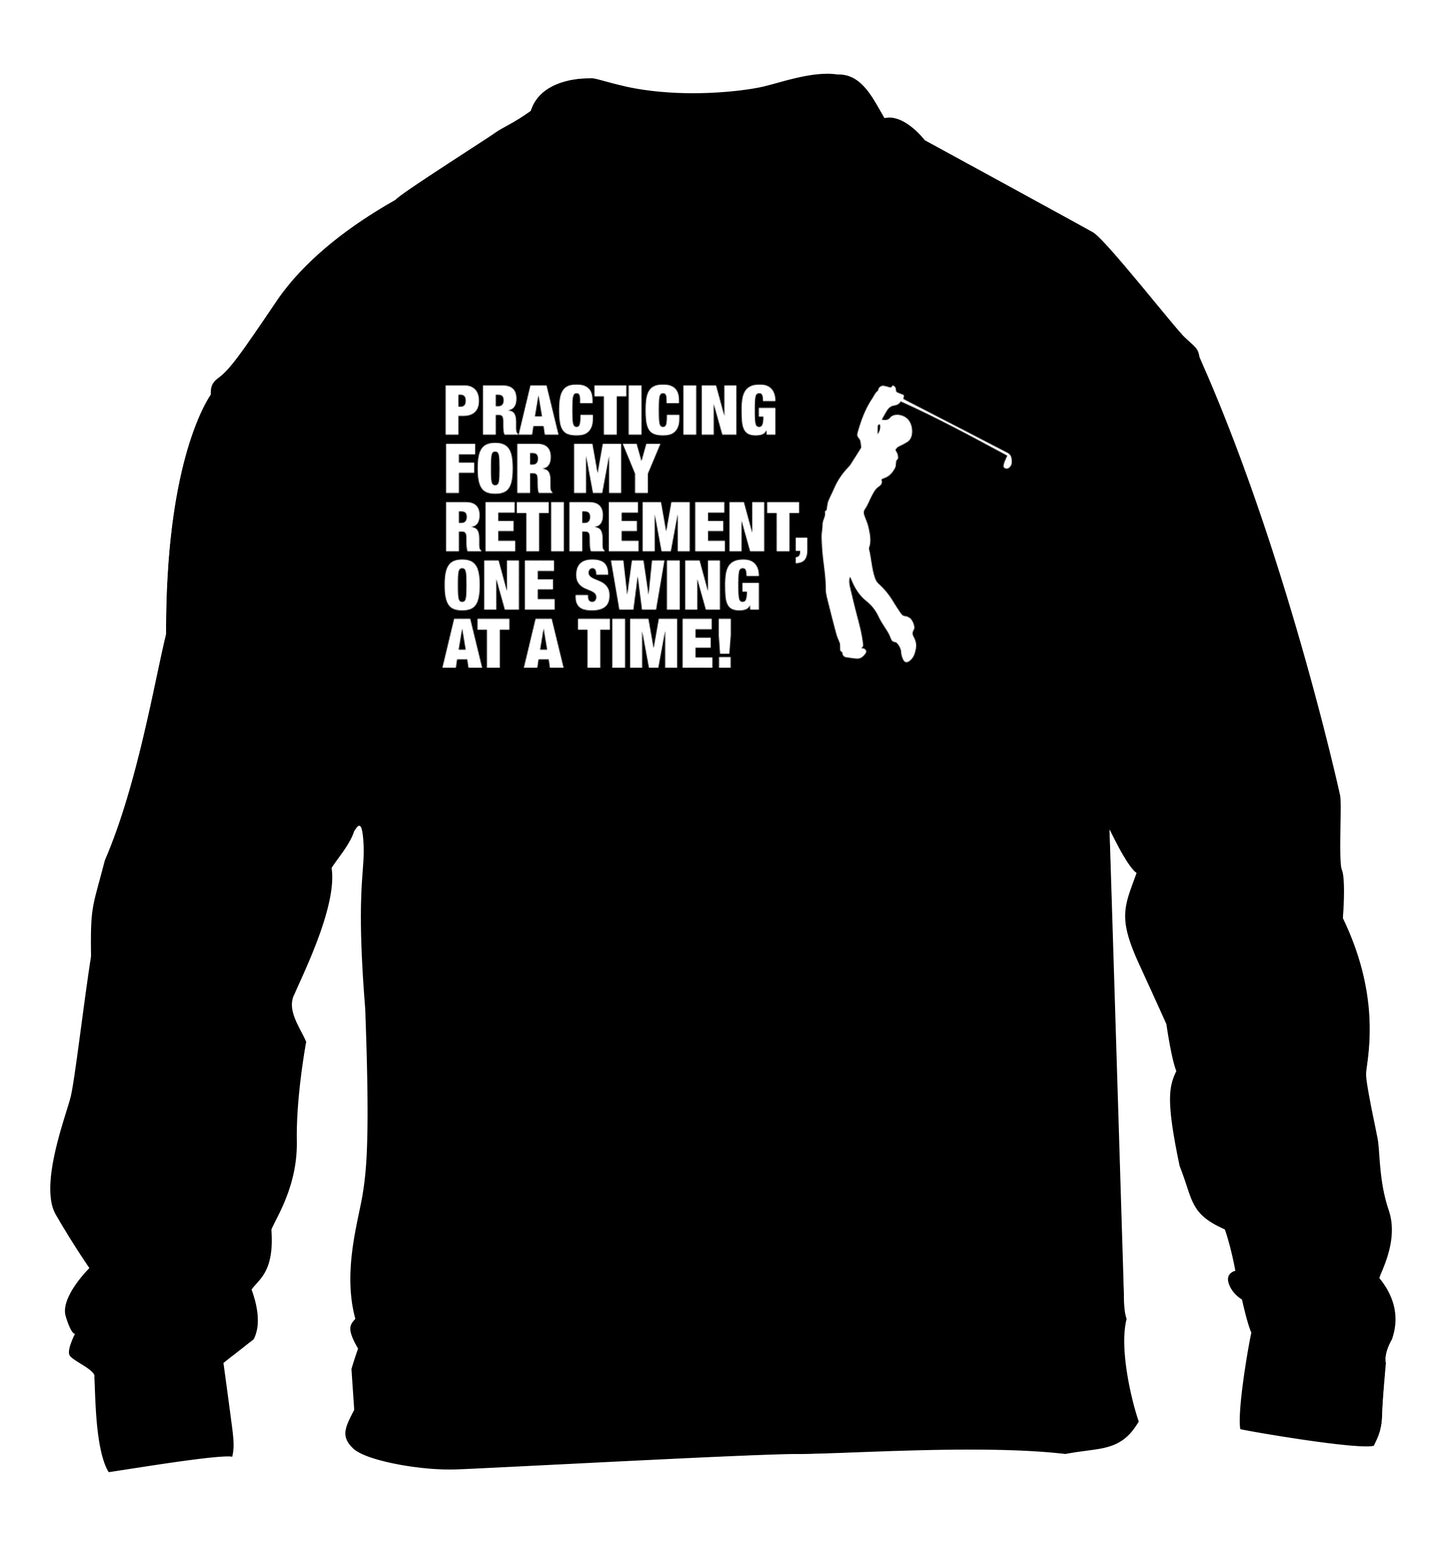 Practicing for my retirement one swing at a time children's black sweater 12-13 Years